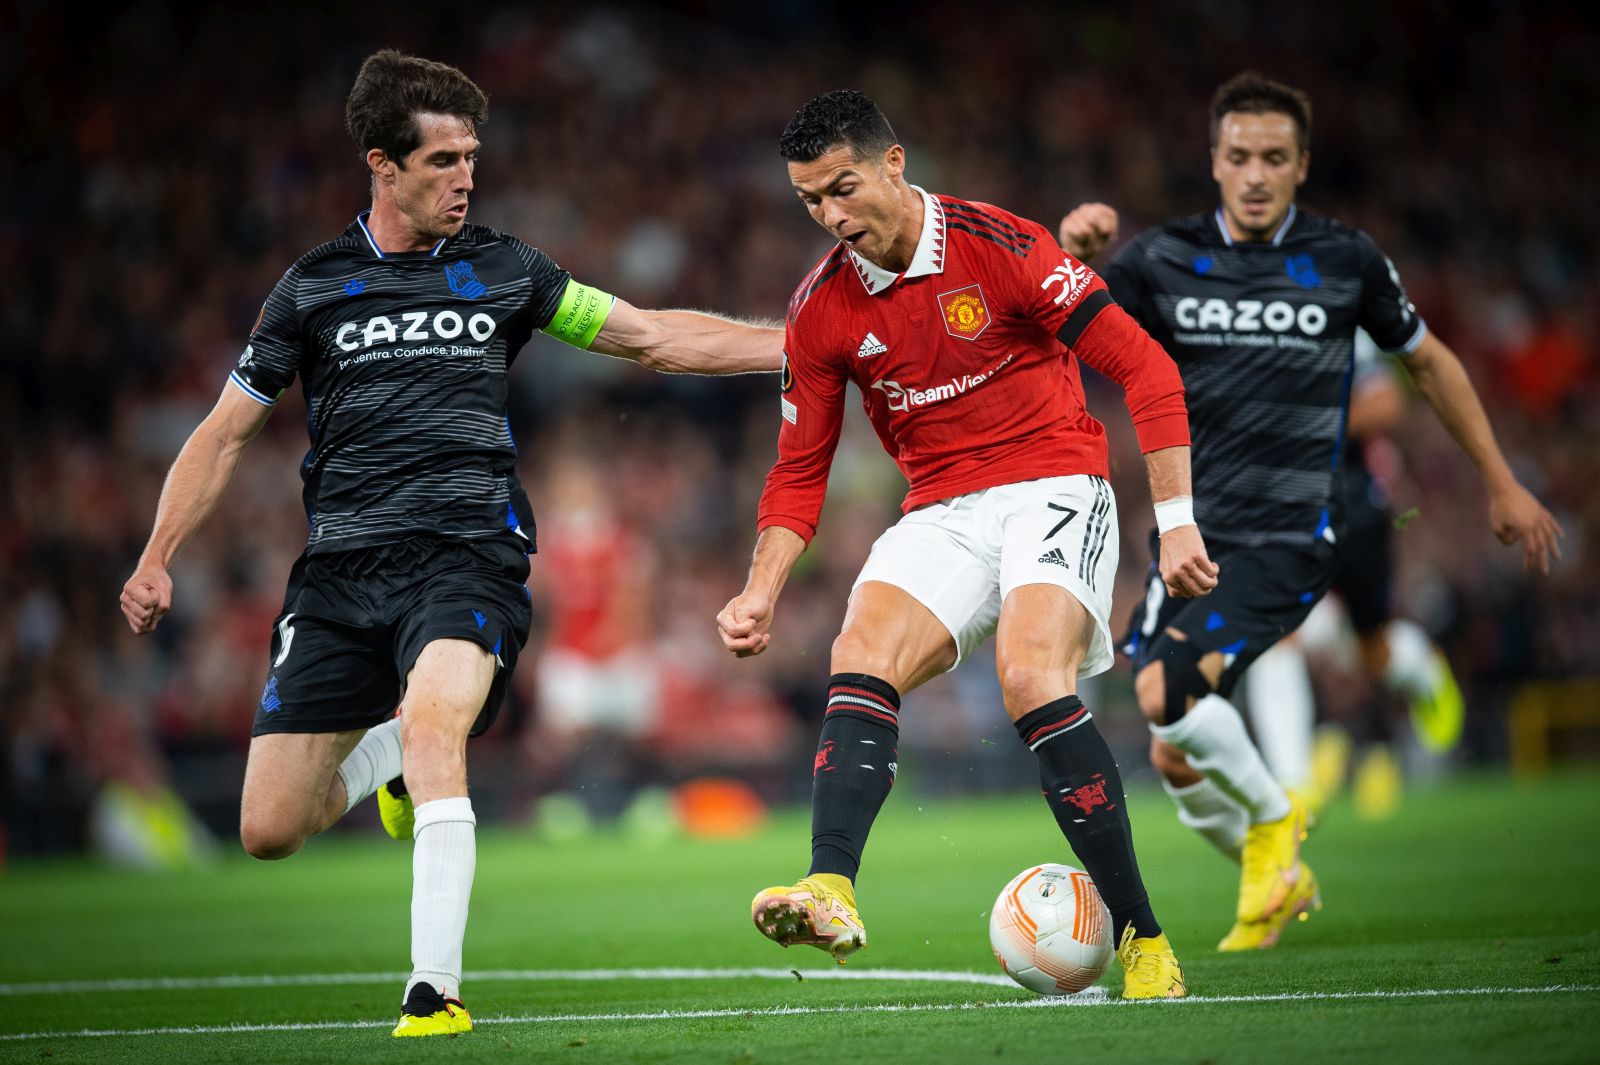 epa10171123 Real Sociedad's Aritz Elustondo (L) in action with Manchester United's Cristiano Ronaldo  (R) during the UEFA Europa League round 1 soccer match between Manchester United and Real Sociedad held in Manchester, Britain, 08 September 2022.  EPA/PETER POWELL